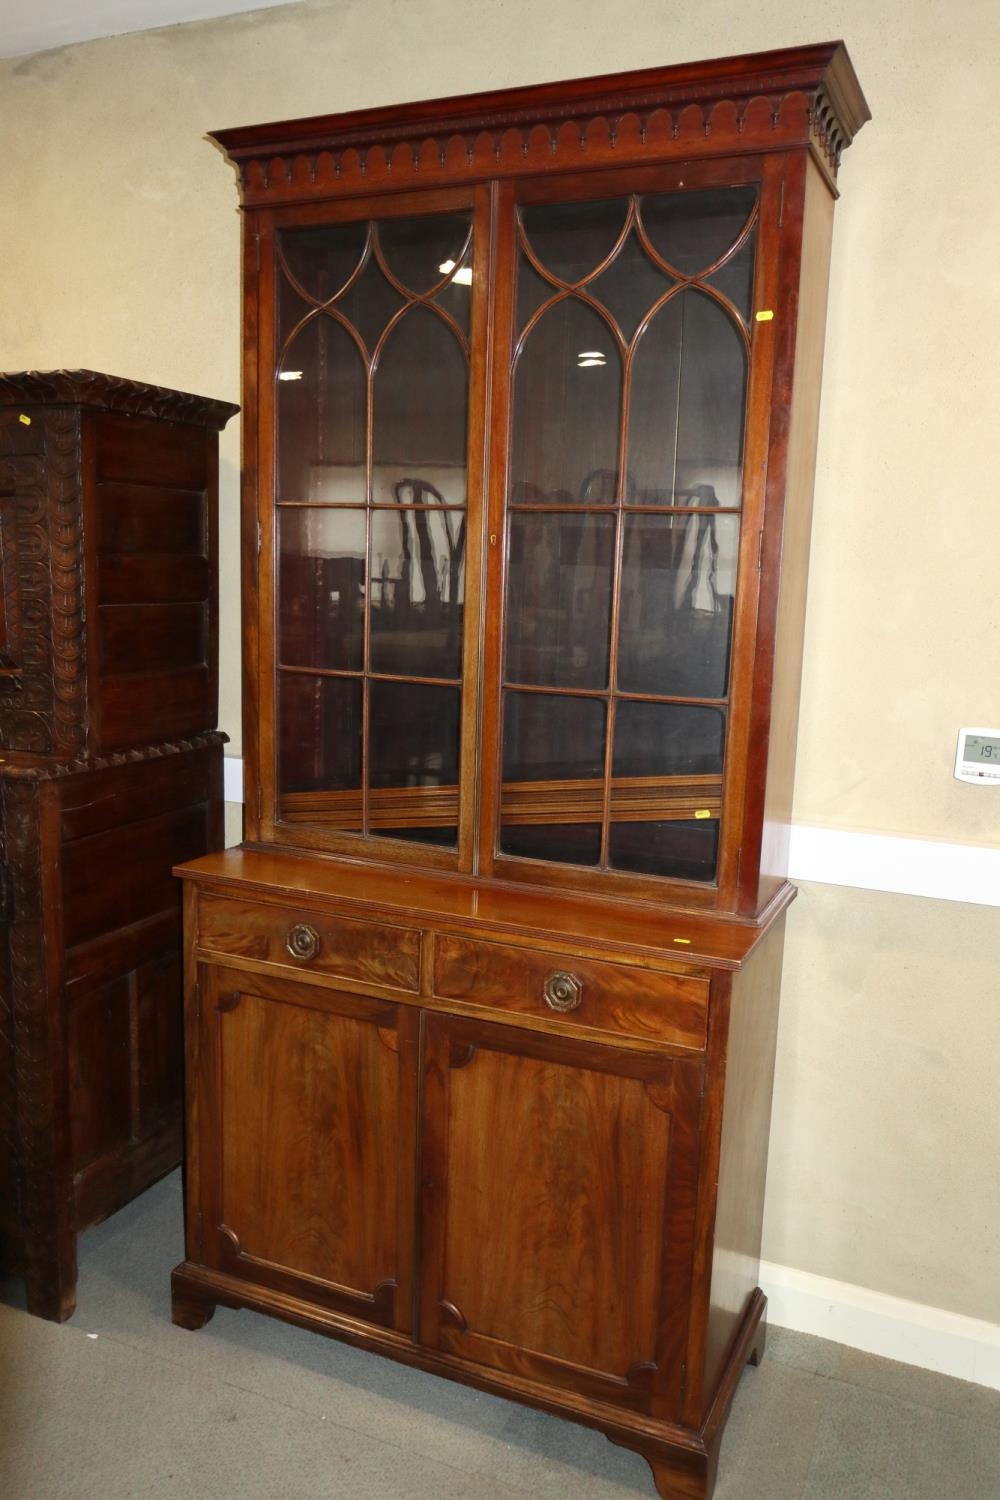 A 19th century mahogany bookcase, the upper section enclosed Gothic lattice glazed doors, over two